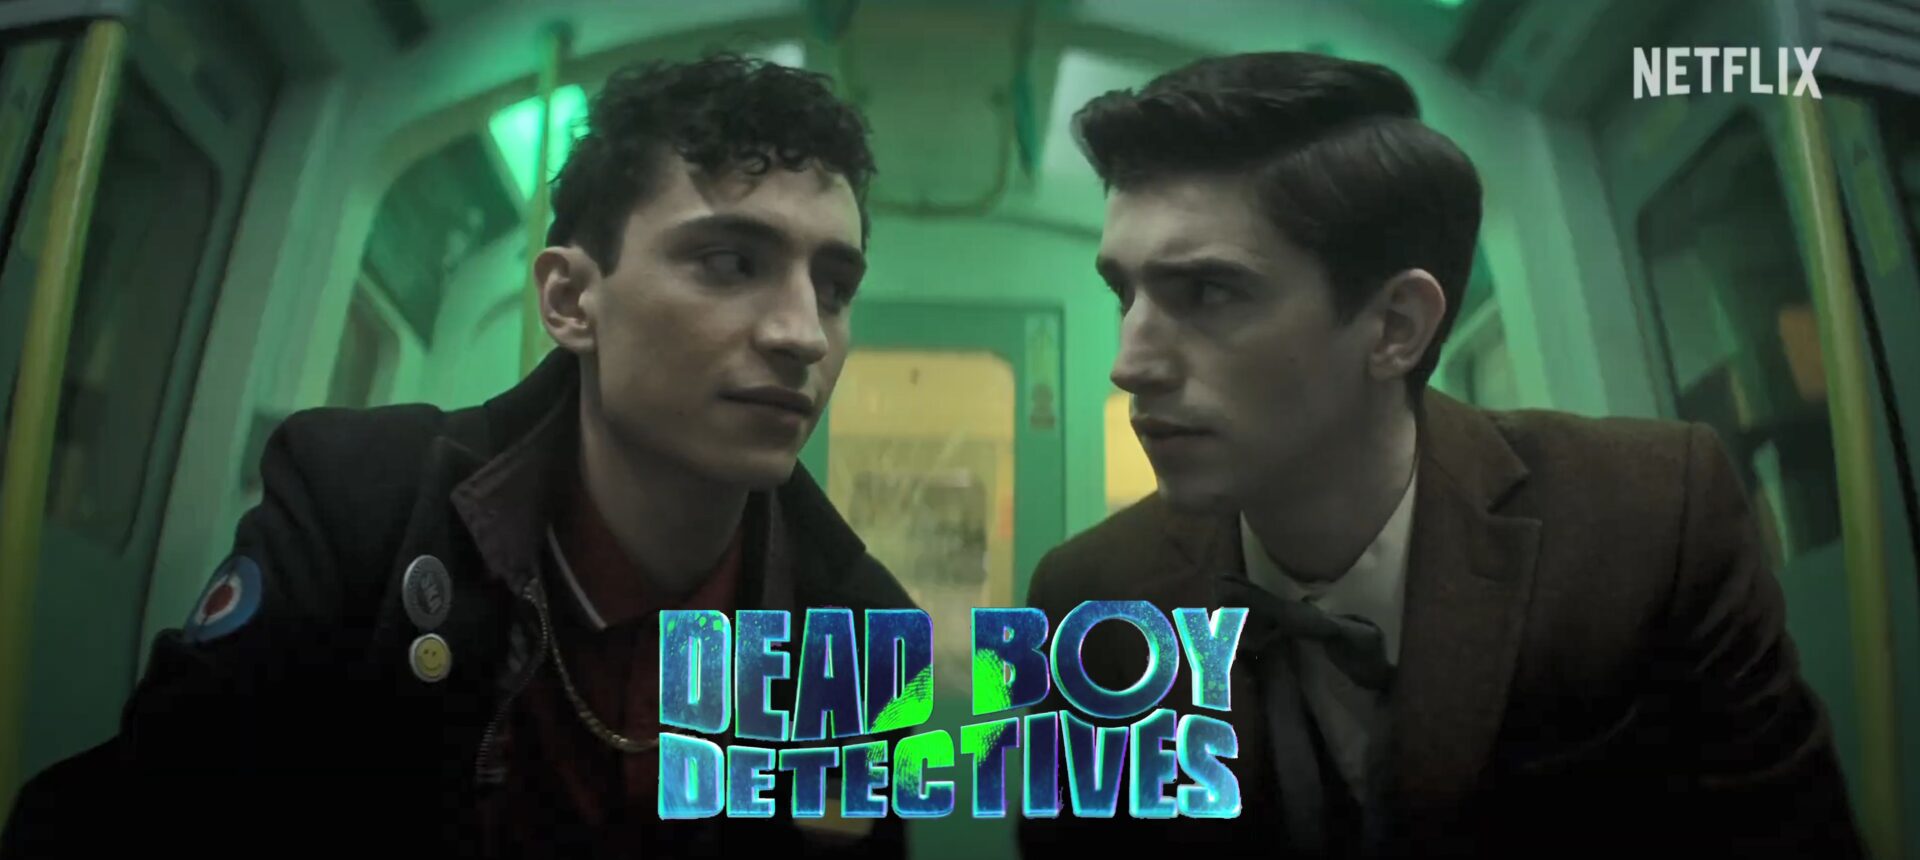 TRAILER: Edwin & Charles Hunt Ghosts as the 'Dead Boy Detectives ...